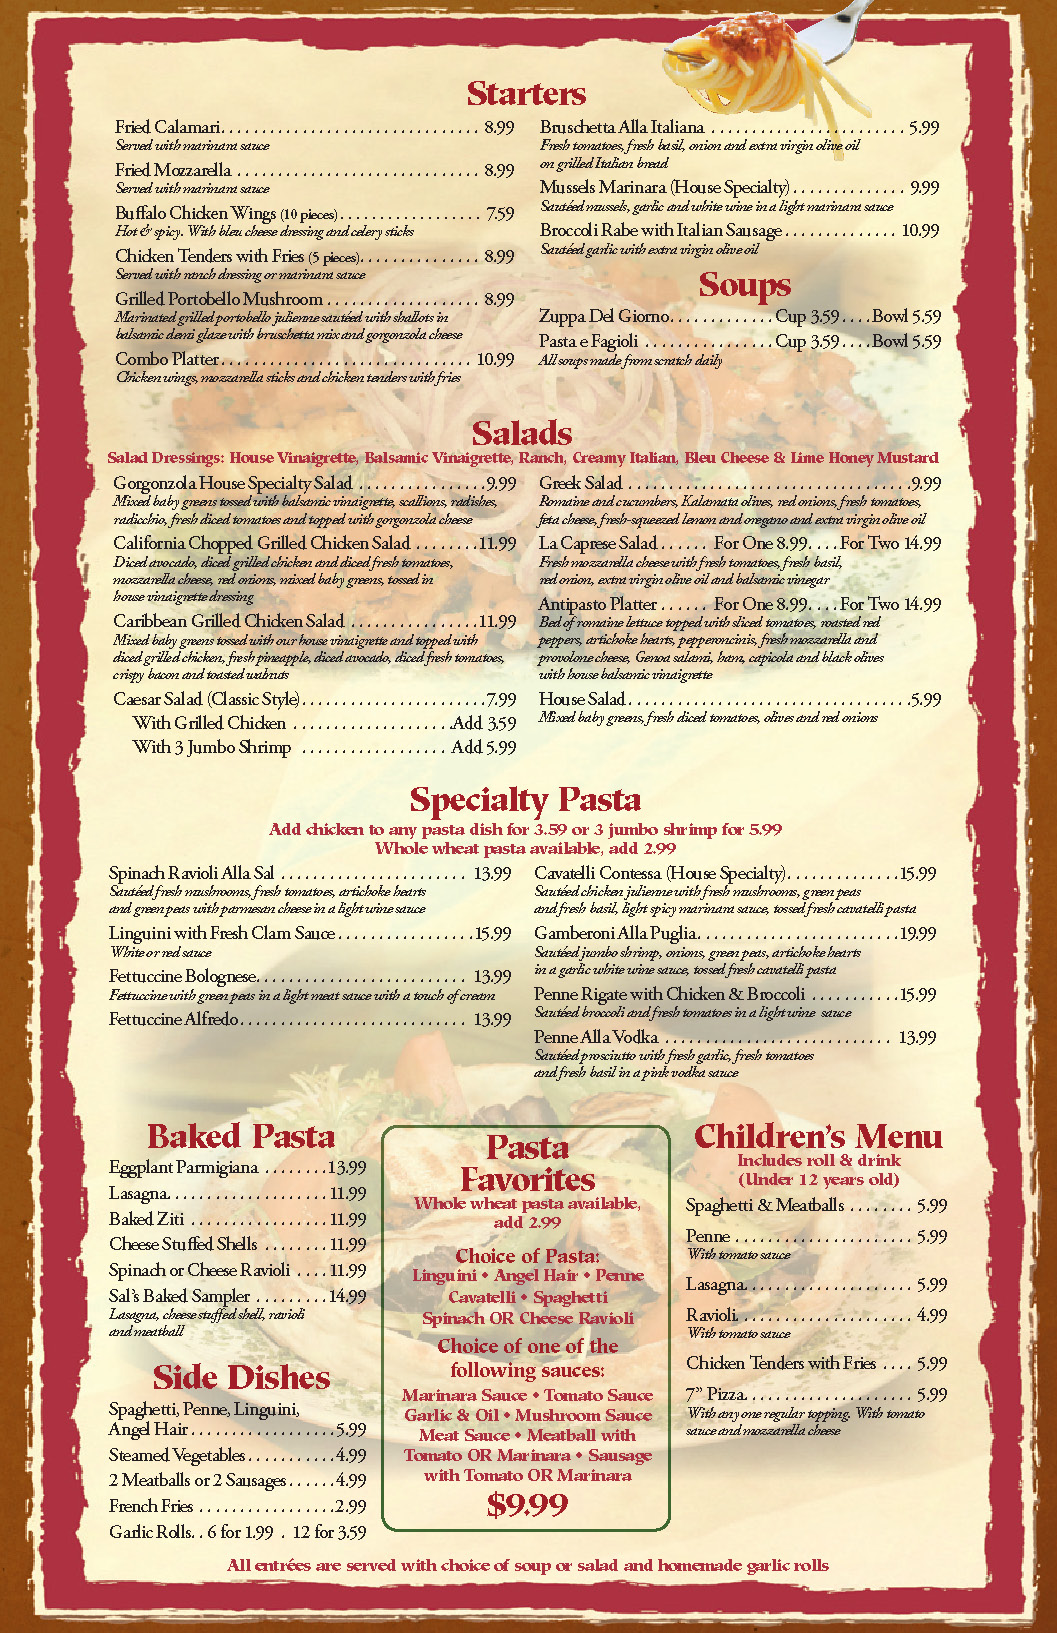 Free Cafe Menu Templates For Word